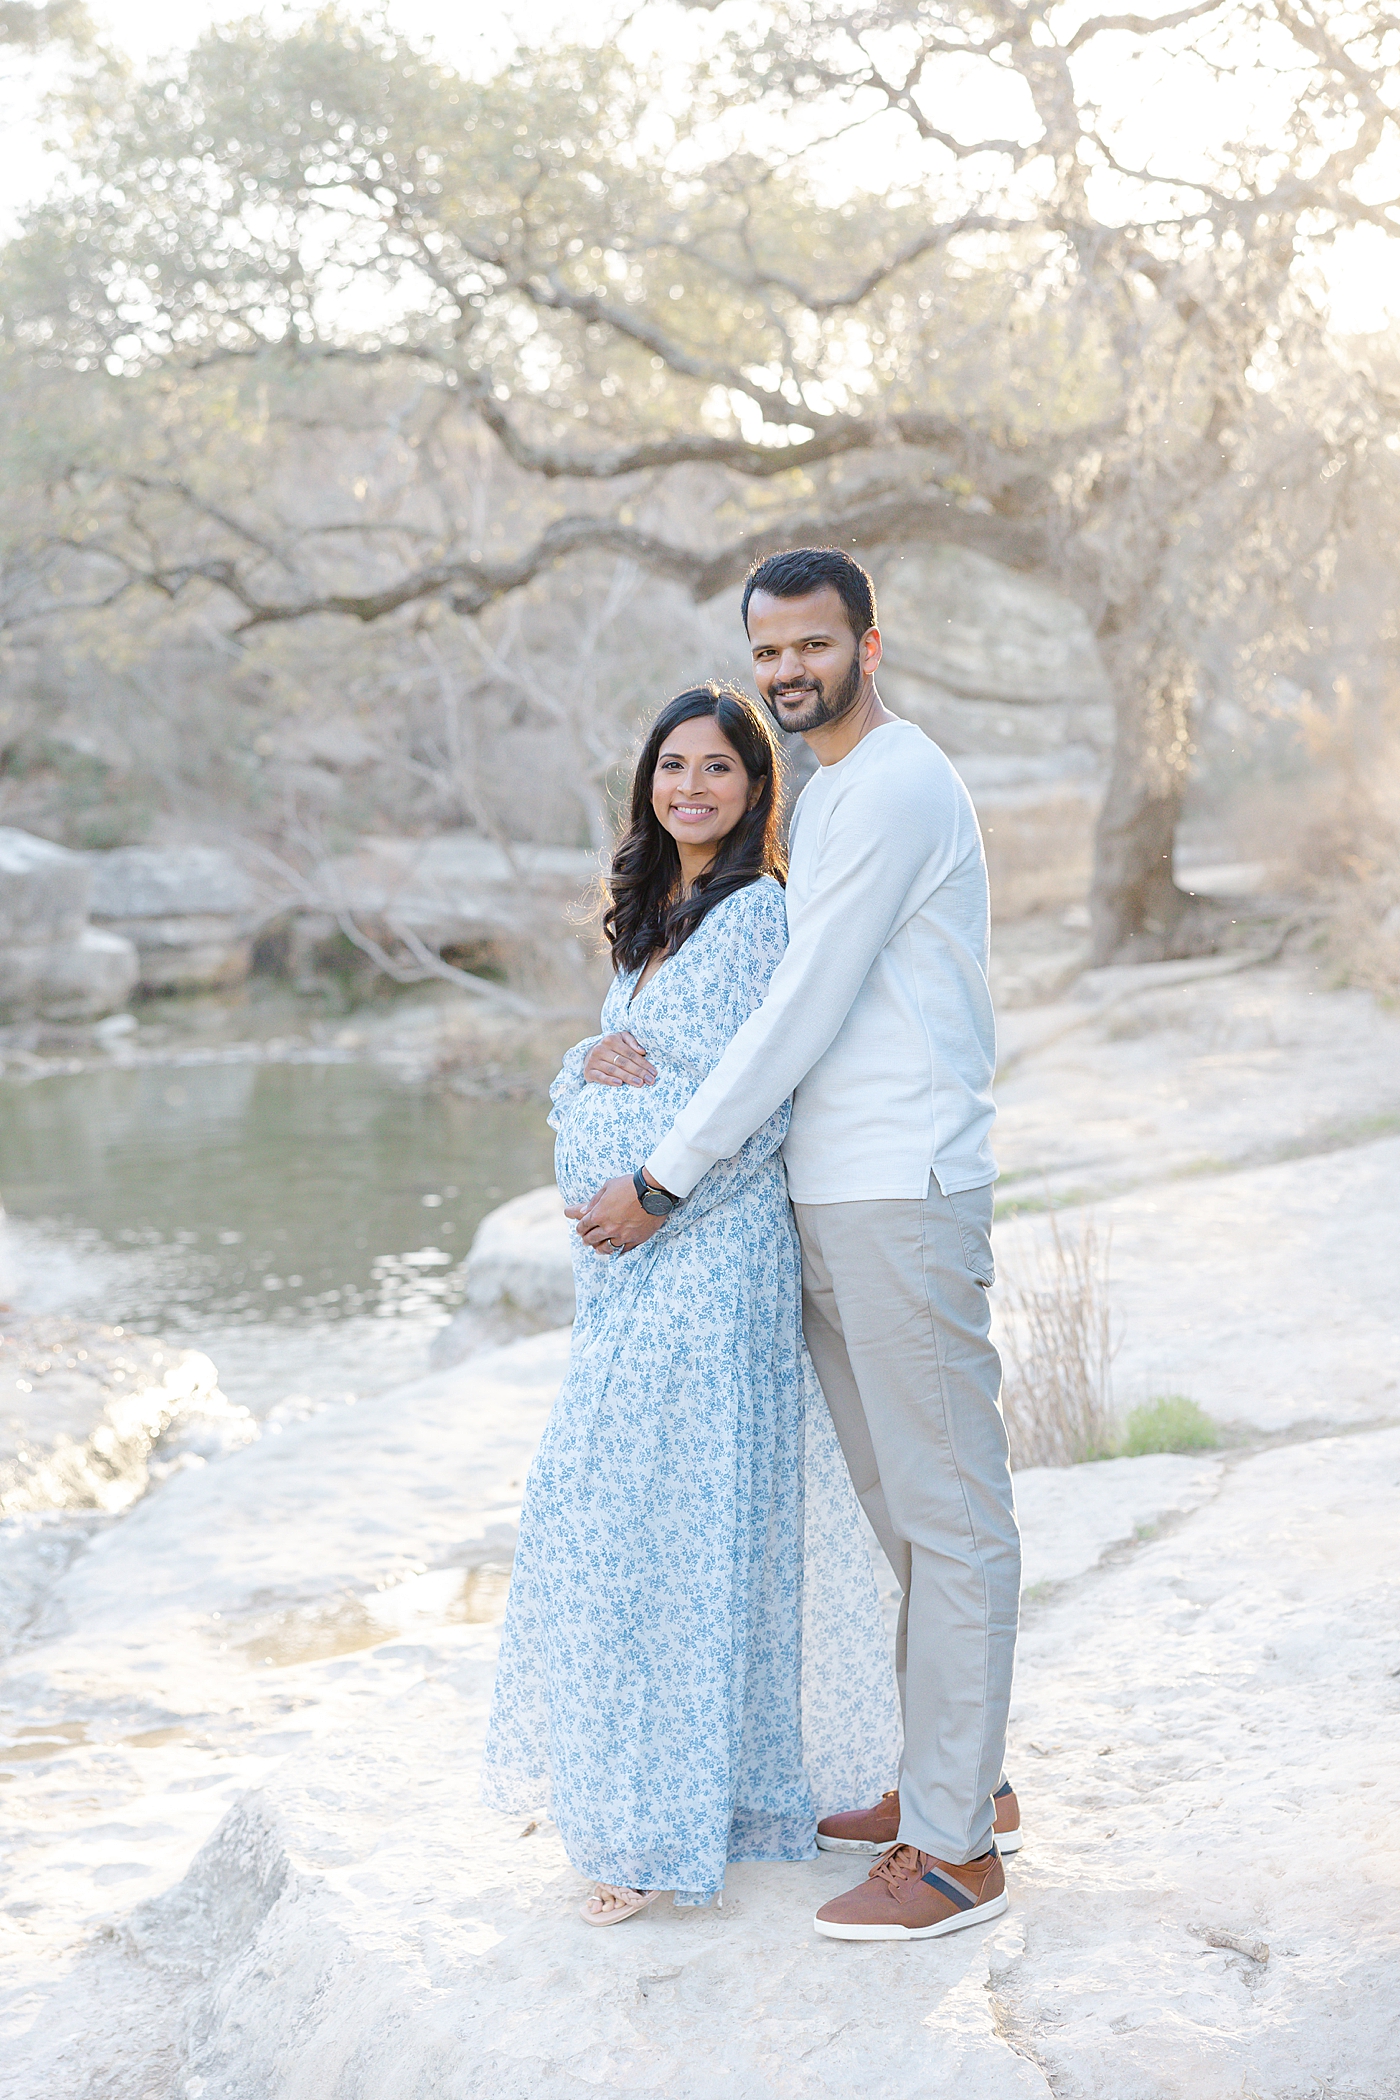 Mom and dad holding mom's belly during maternity photos | Images by Sana Ahmed 